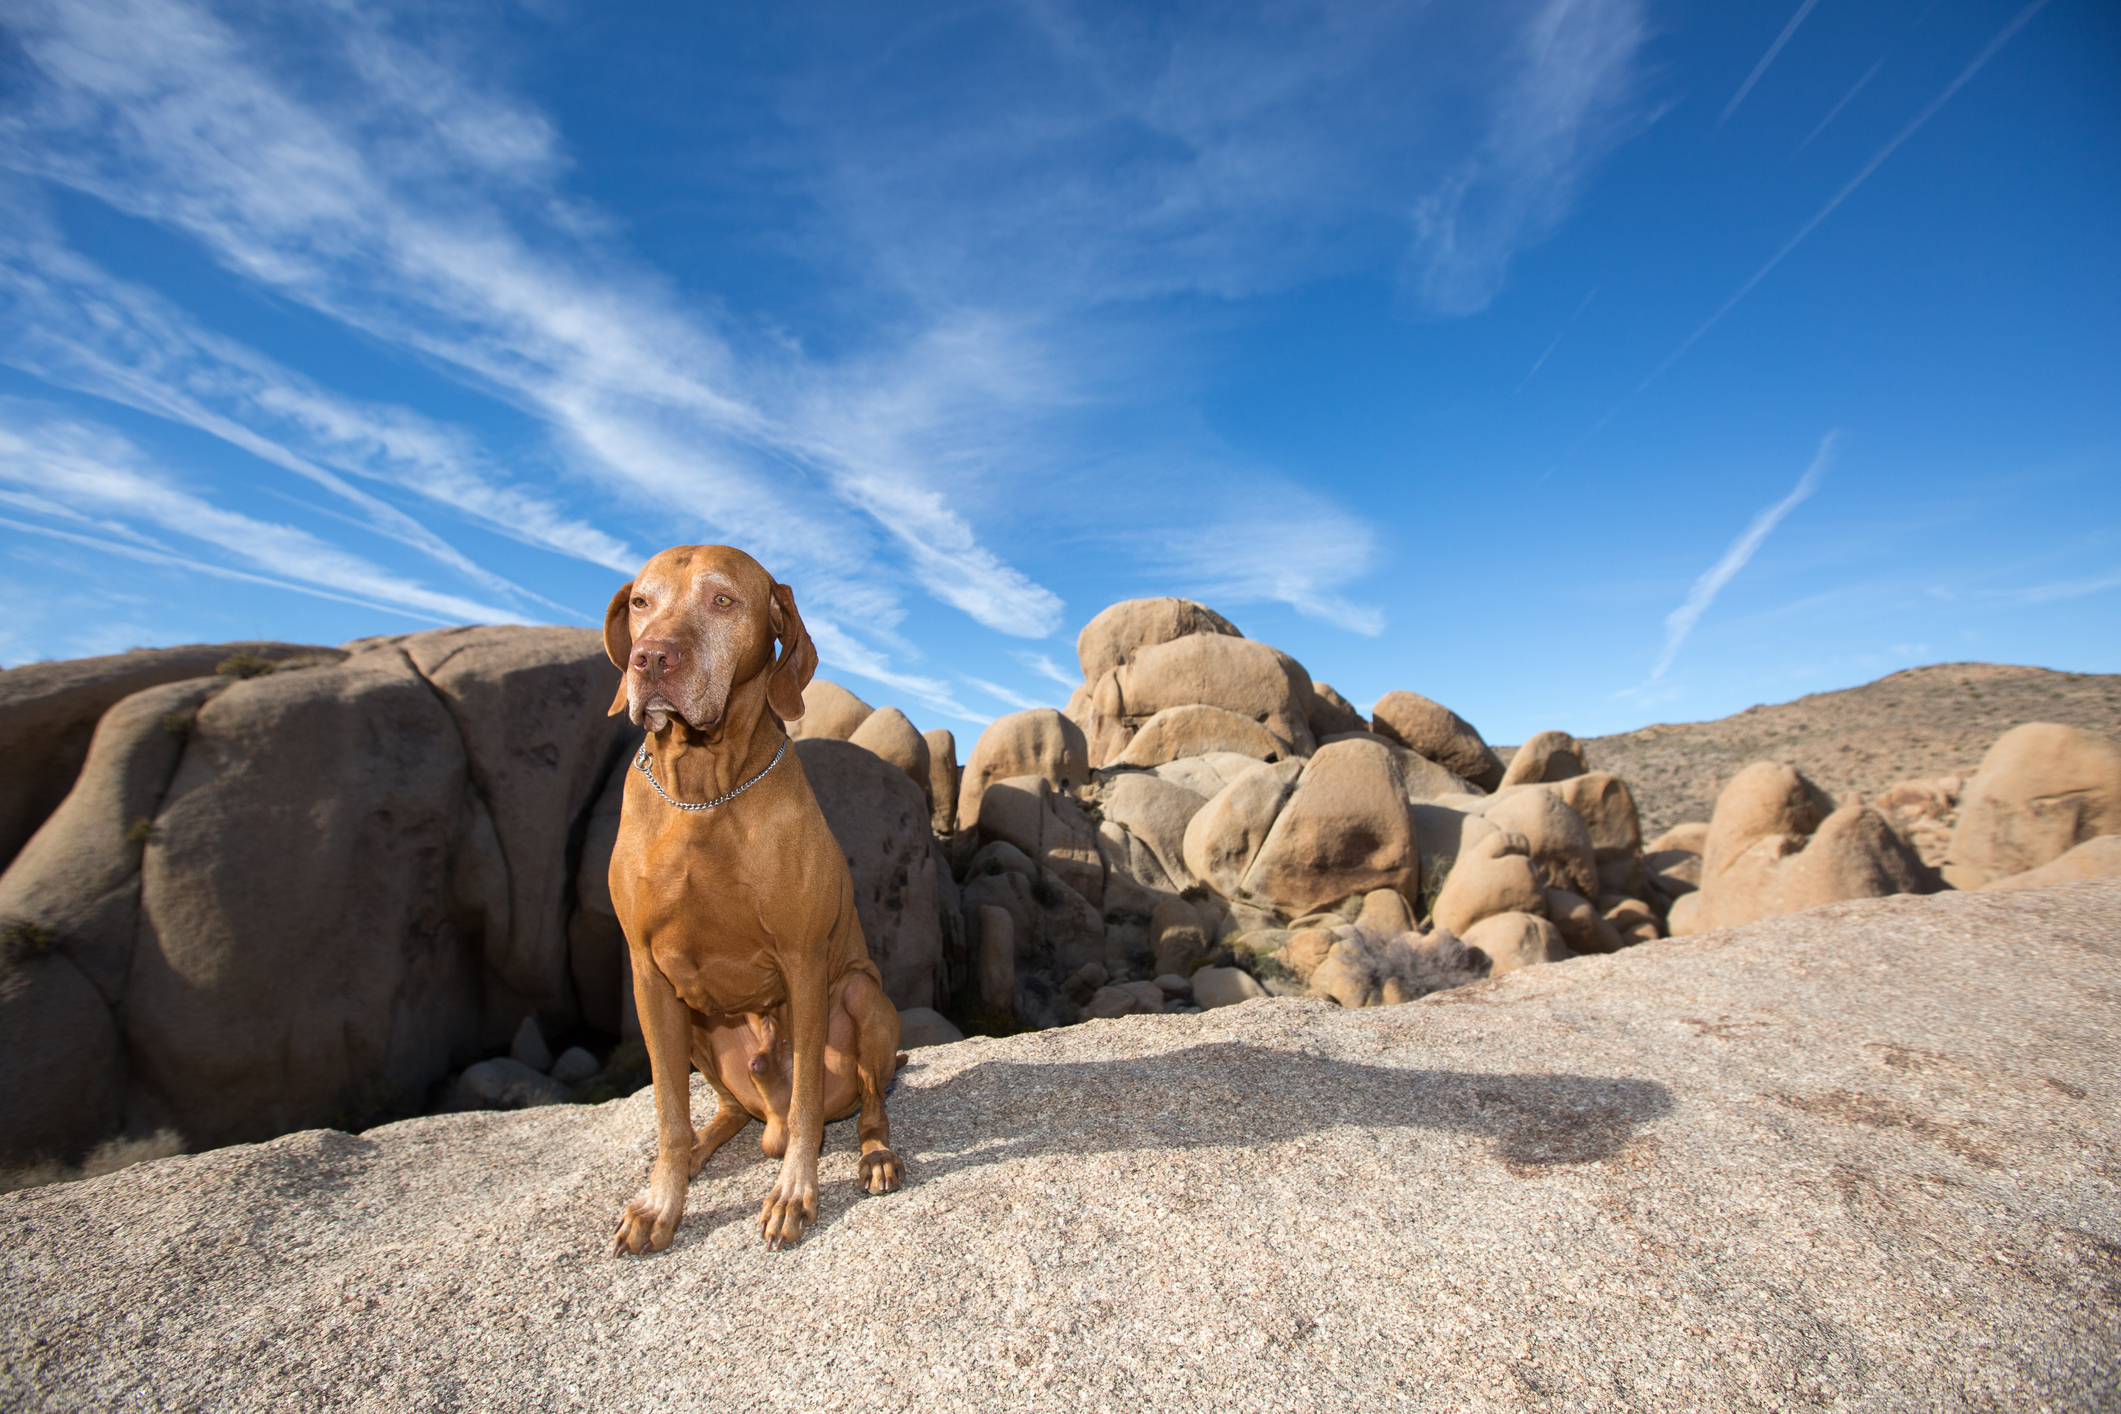 A dog near some rubbed boulders.